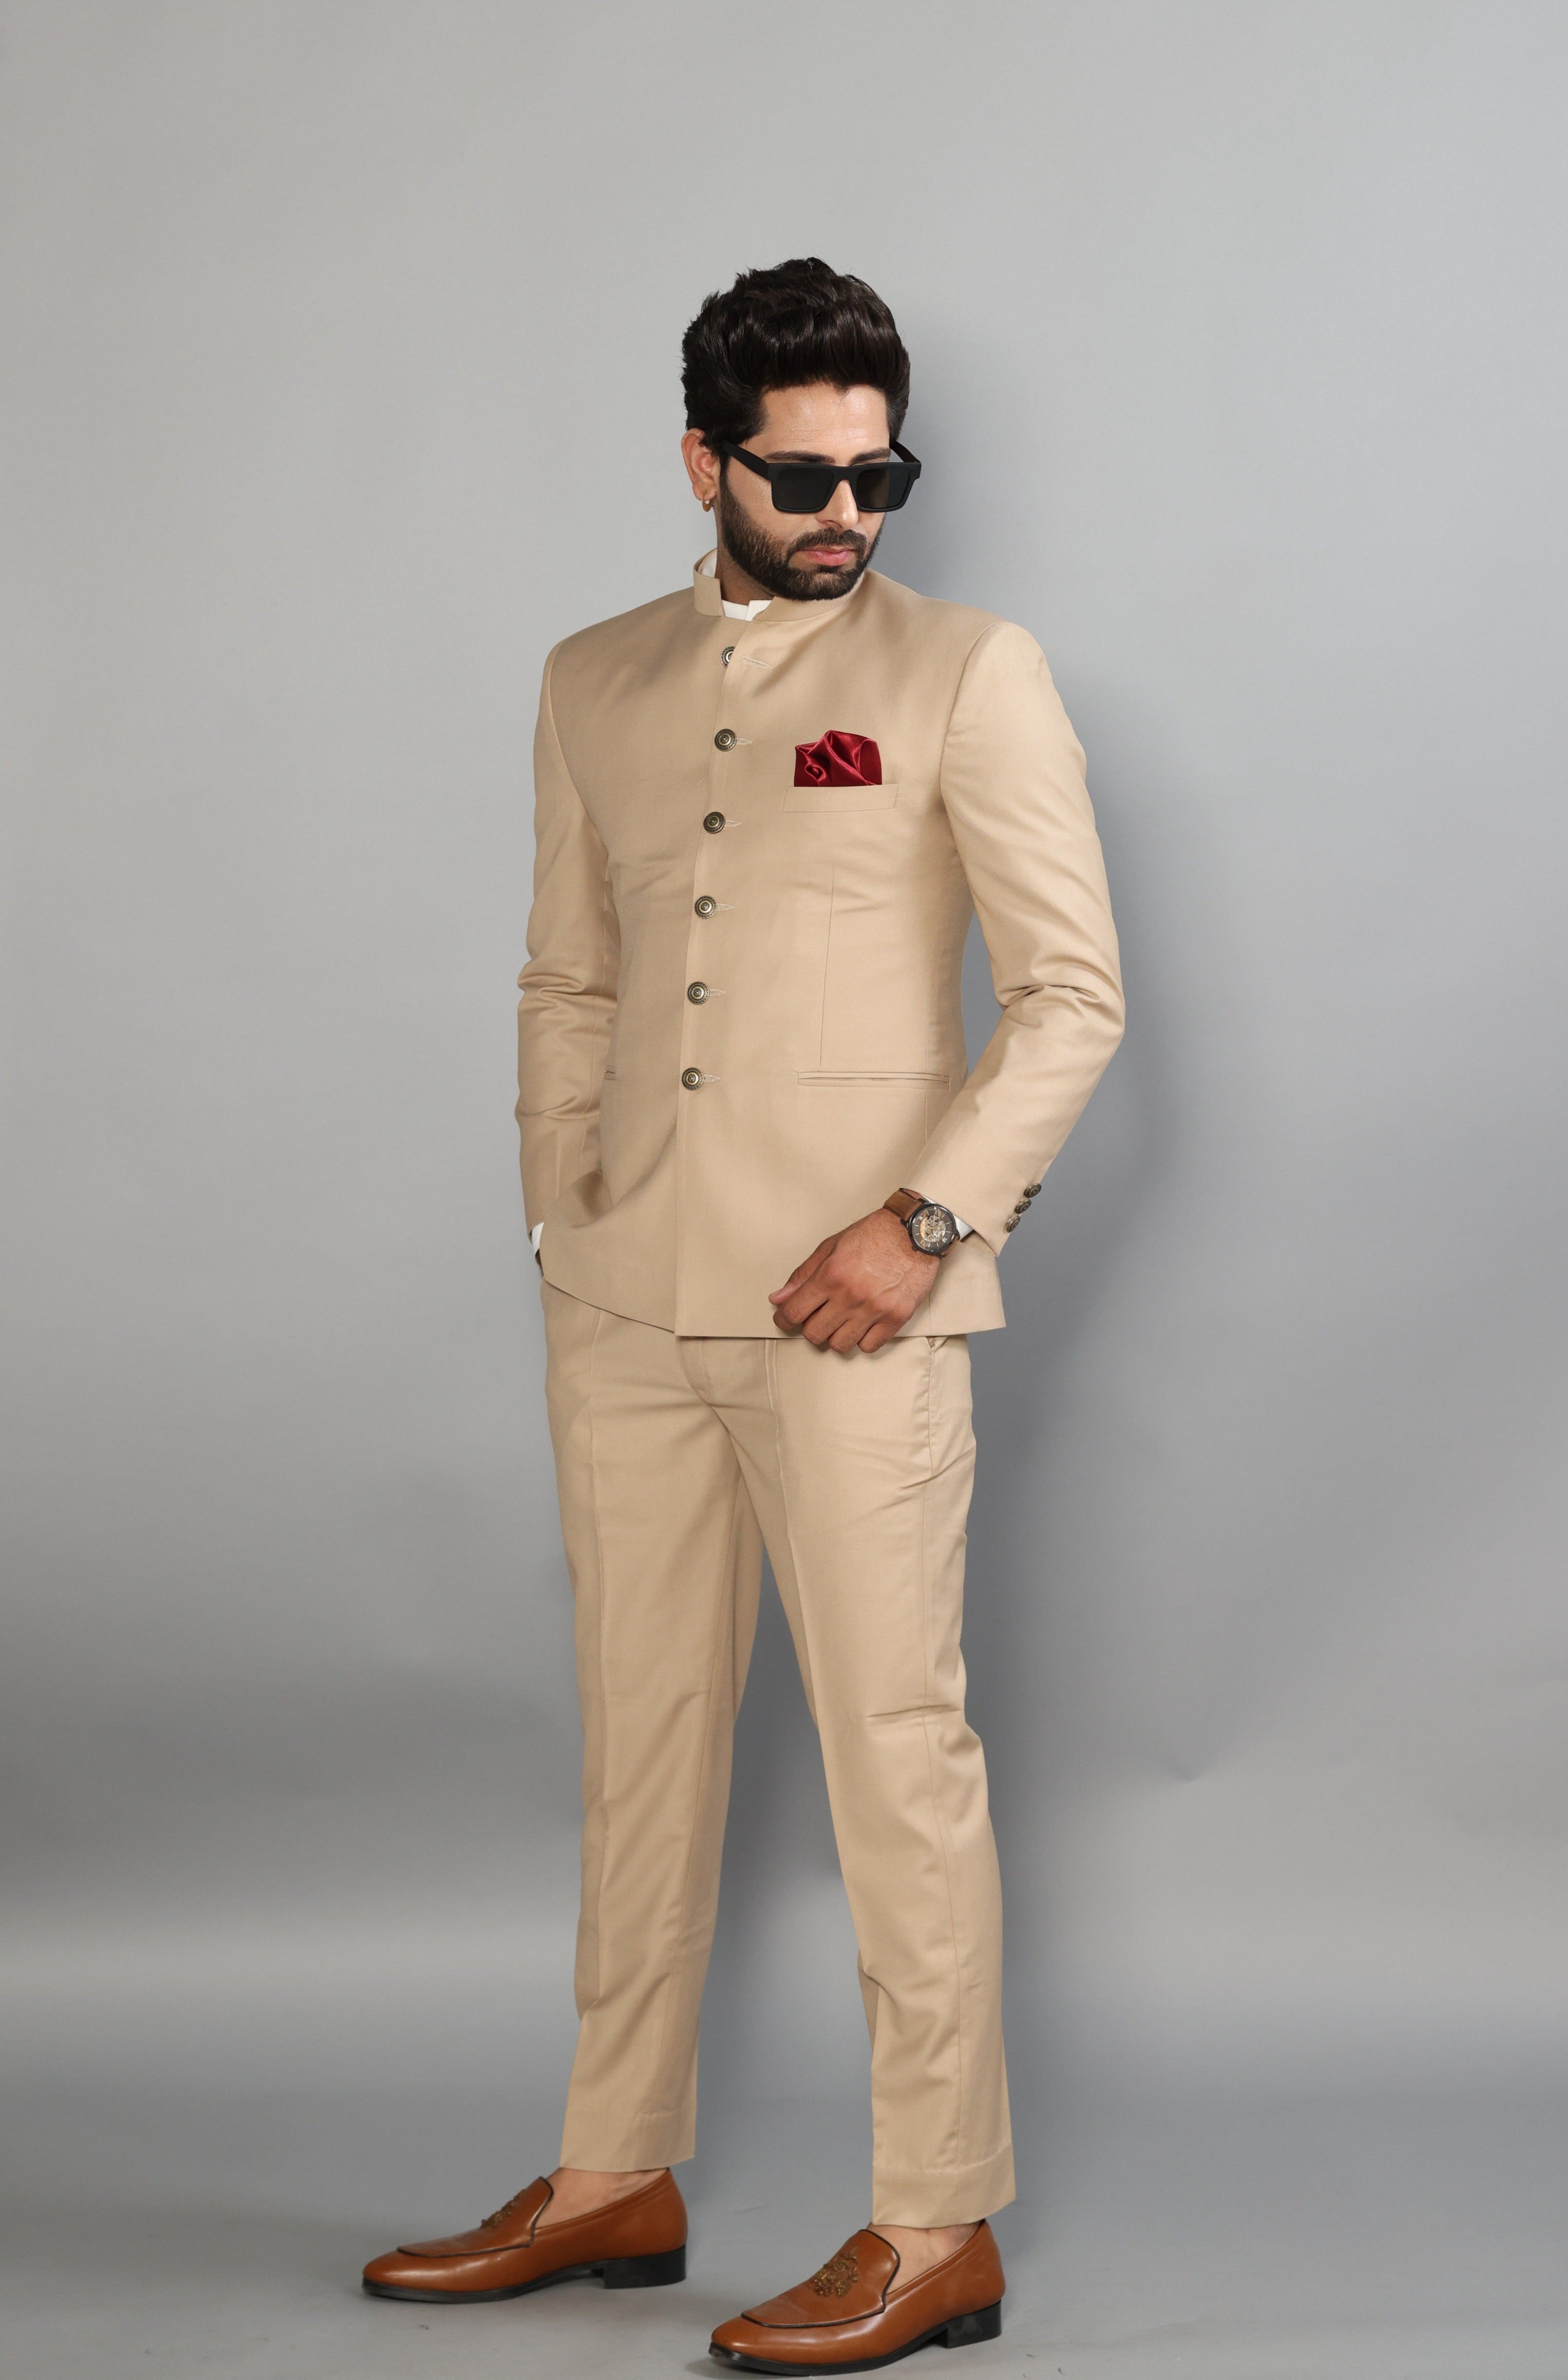 Beige Beige Suit Men With Notch Lapel For Weddings, Proms, And Special  Occasions Tailored Blazer Jacket And Trousers Q230828 From Psychoo, $23.98  | DHgate.Com